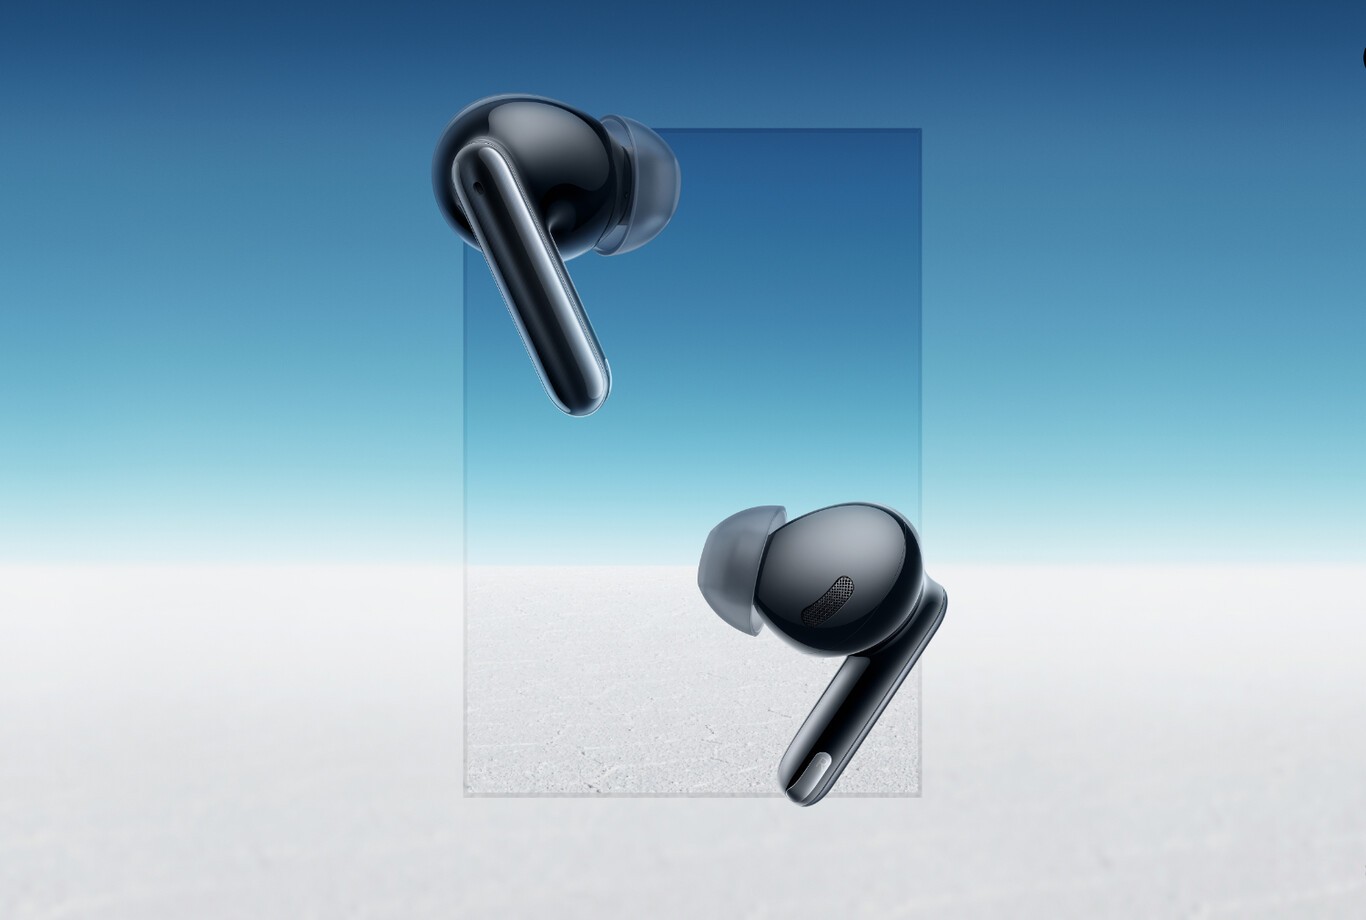 Rival of Xiaomi FlipBuds Pro and Apple AirPods Pro: OPPO will unveil flagship TWS headphones Enco on May 20